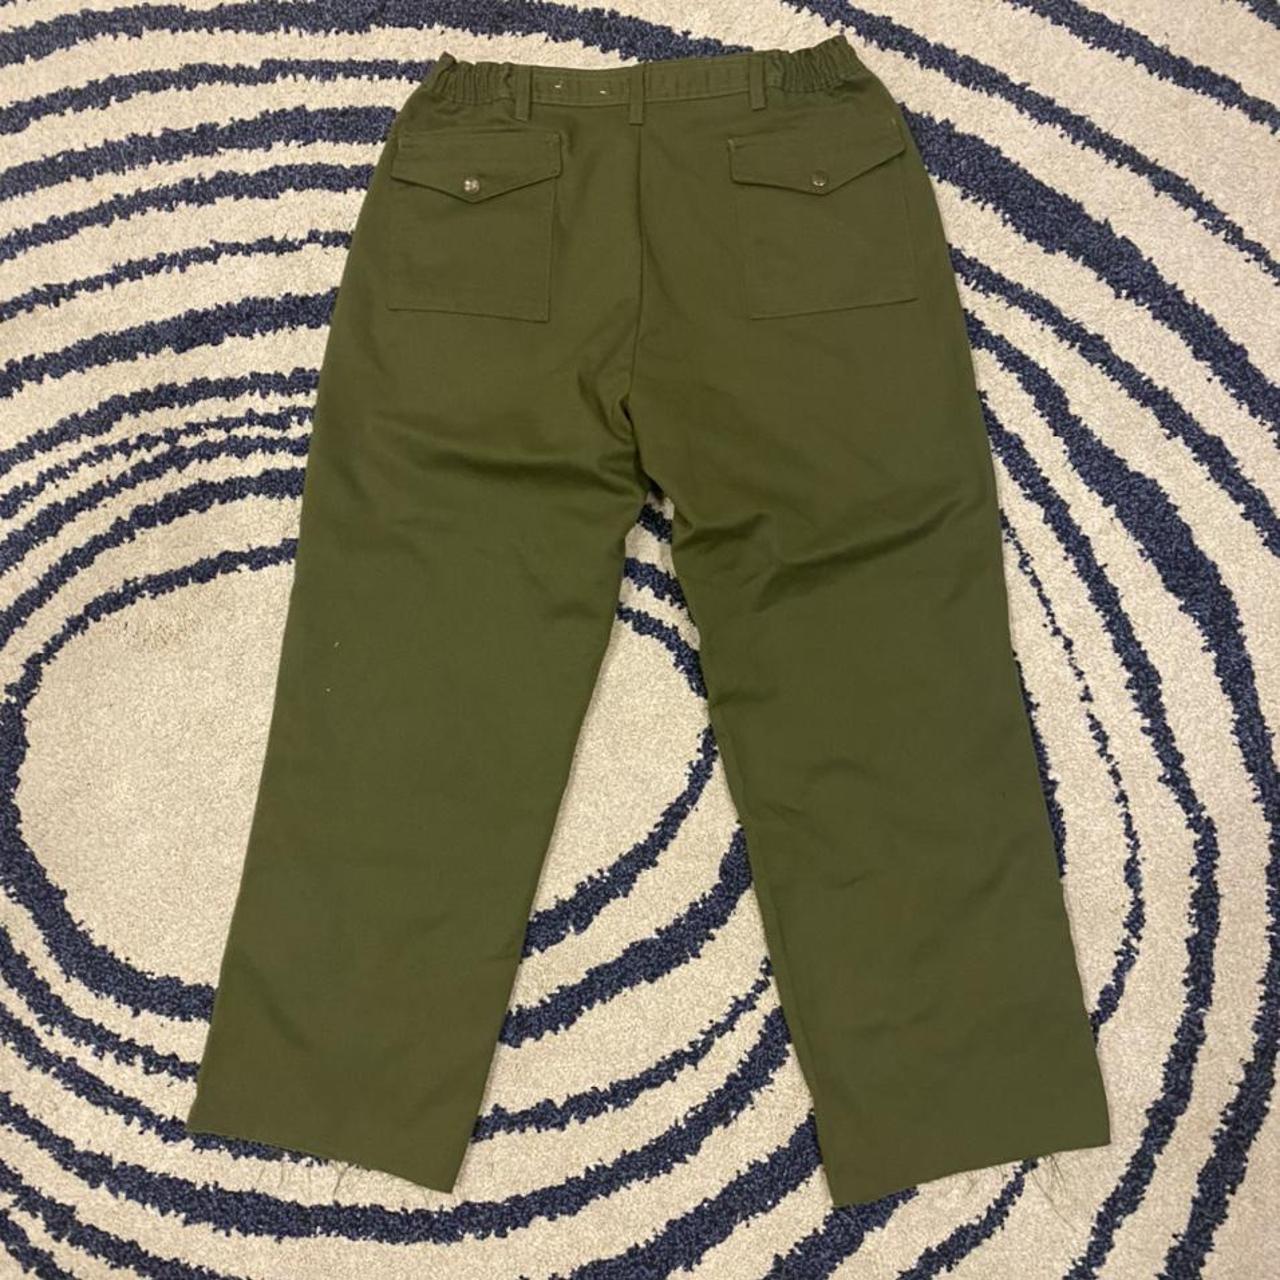 Vintage army green pants! Tagged 34x34. DM for any... - Depop